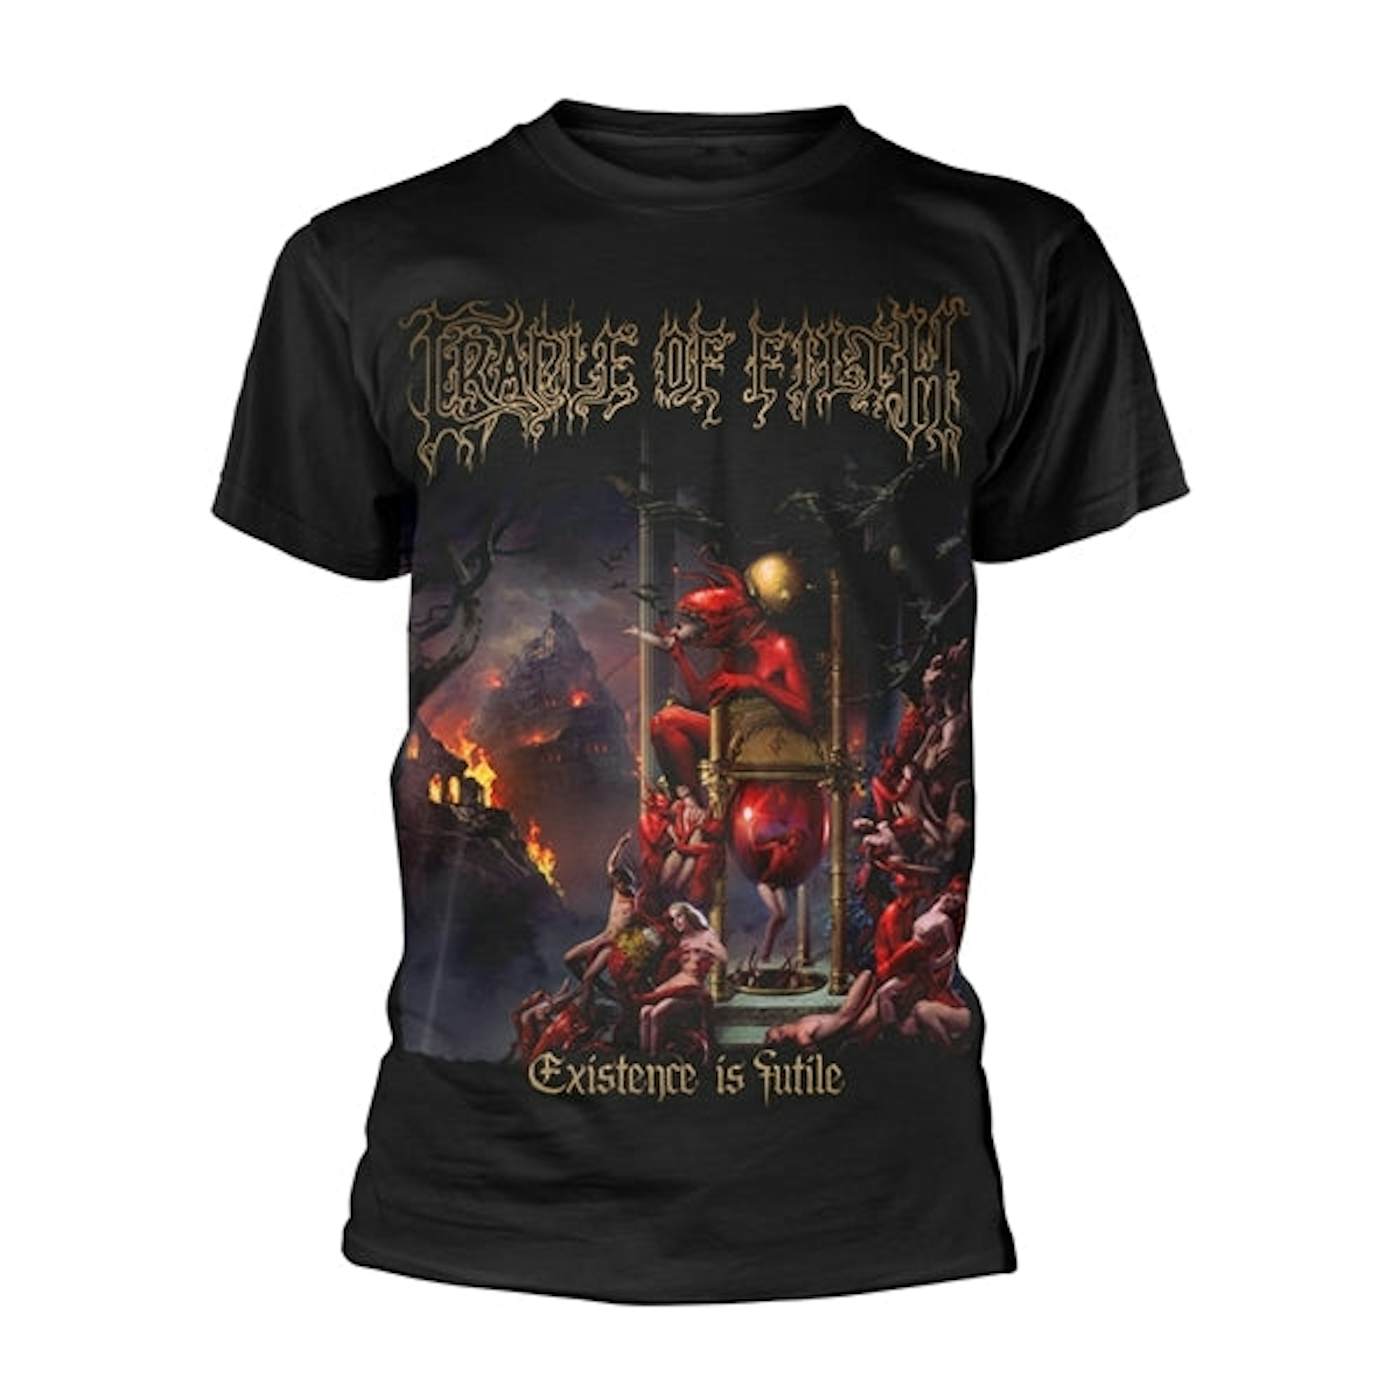 Cradle Of Filth T Shirt - Existence (All Existence)